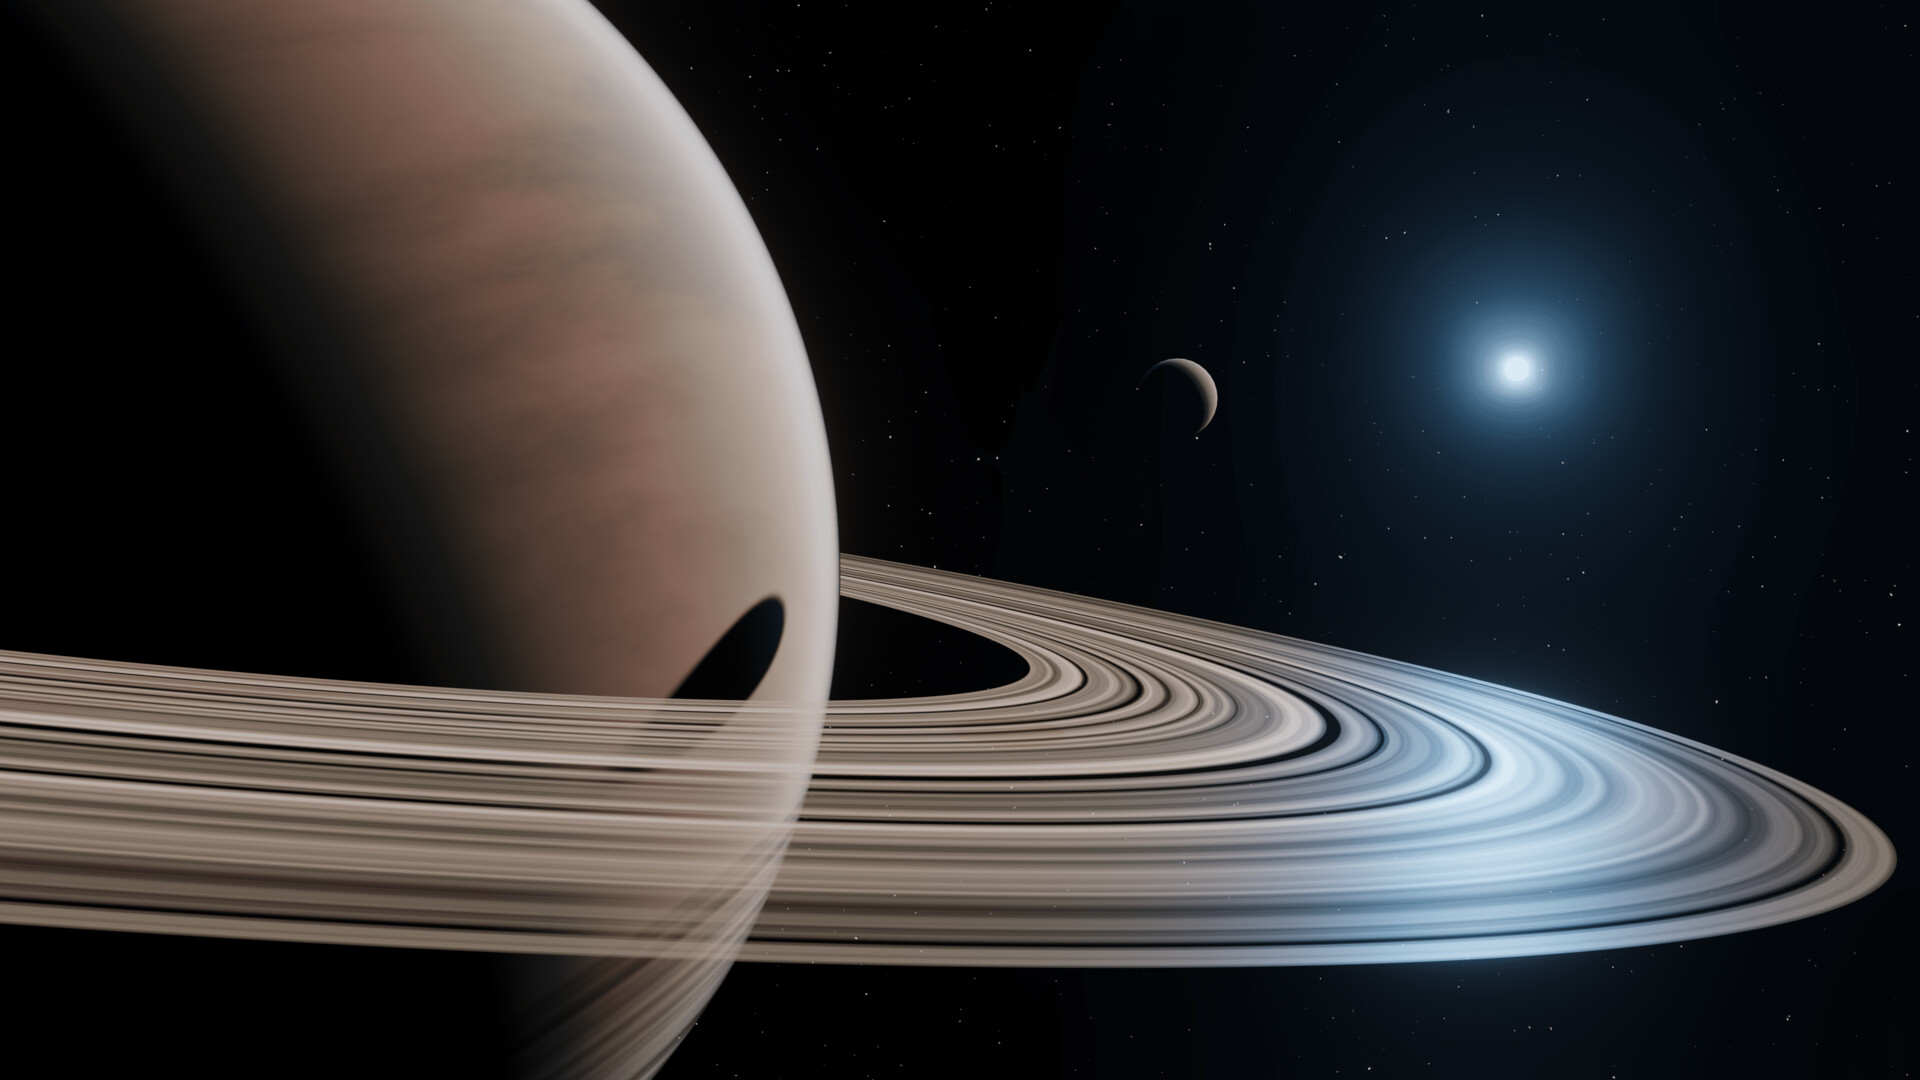 procedural gas giant with rings